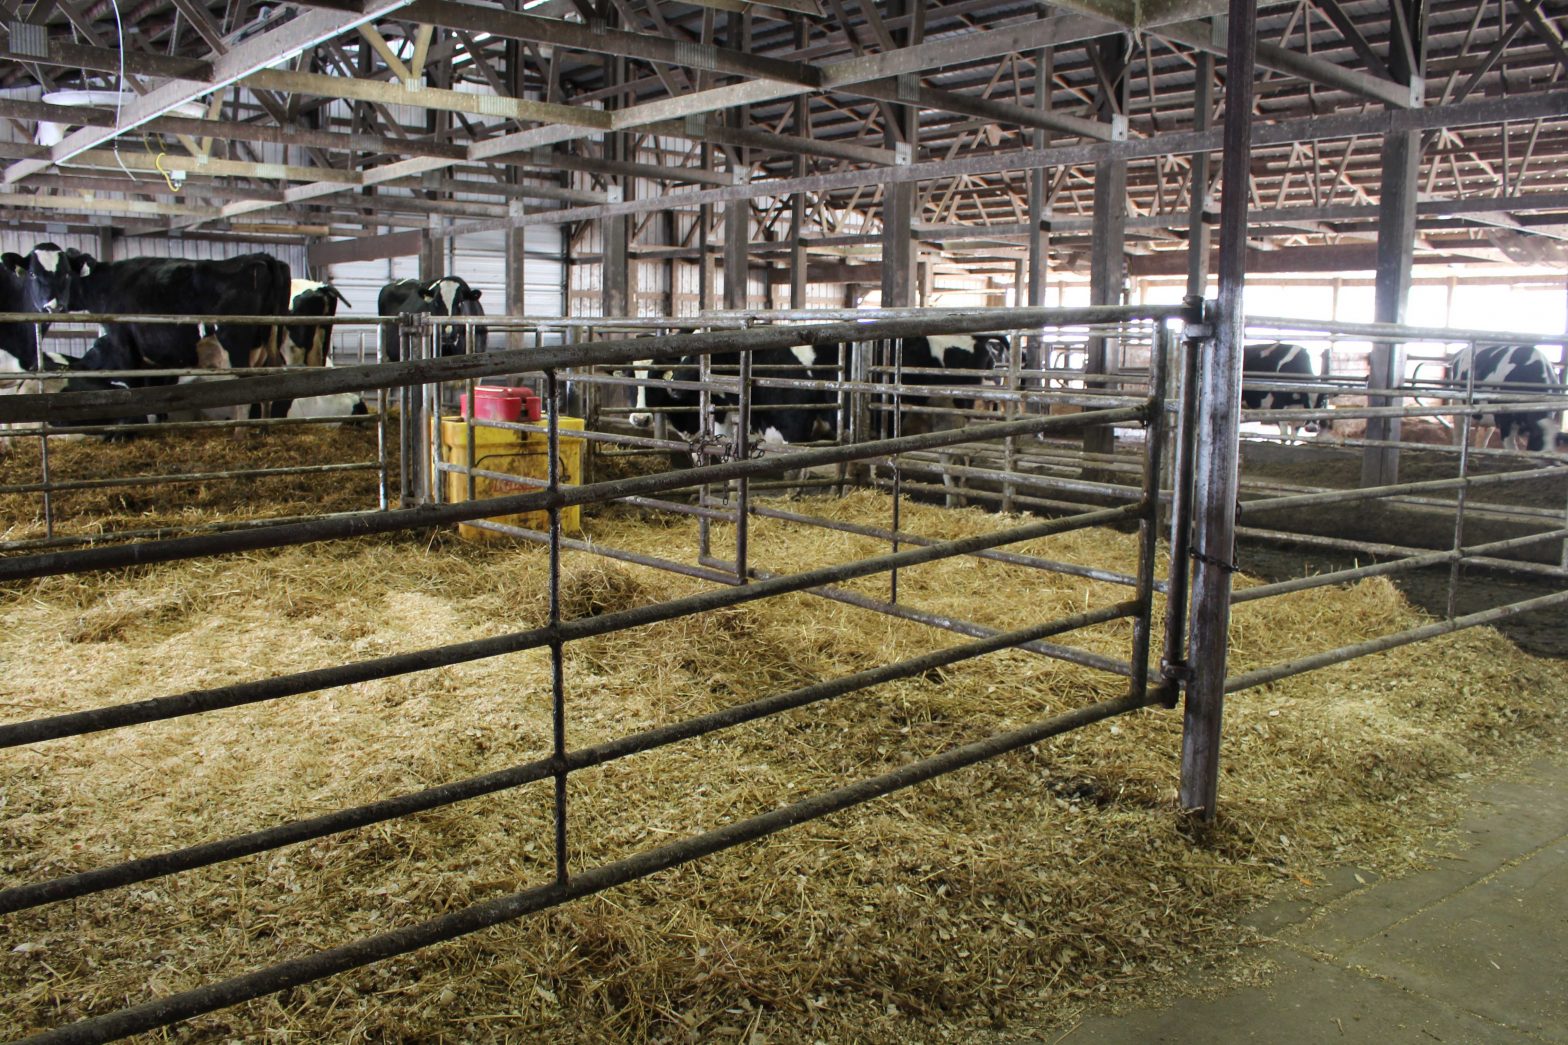 Homeland Dairy LLP in Brandon, Wisconsin, is focused on management protocols that are simple and easy for all team members to follow.  Close-up cows are housed on bed packs and move into individual calving pens.  Maternal colostrum is harvested and fed to newborn calves as quickly as possible.